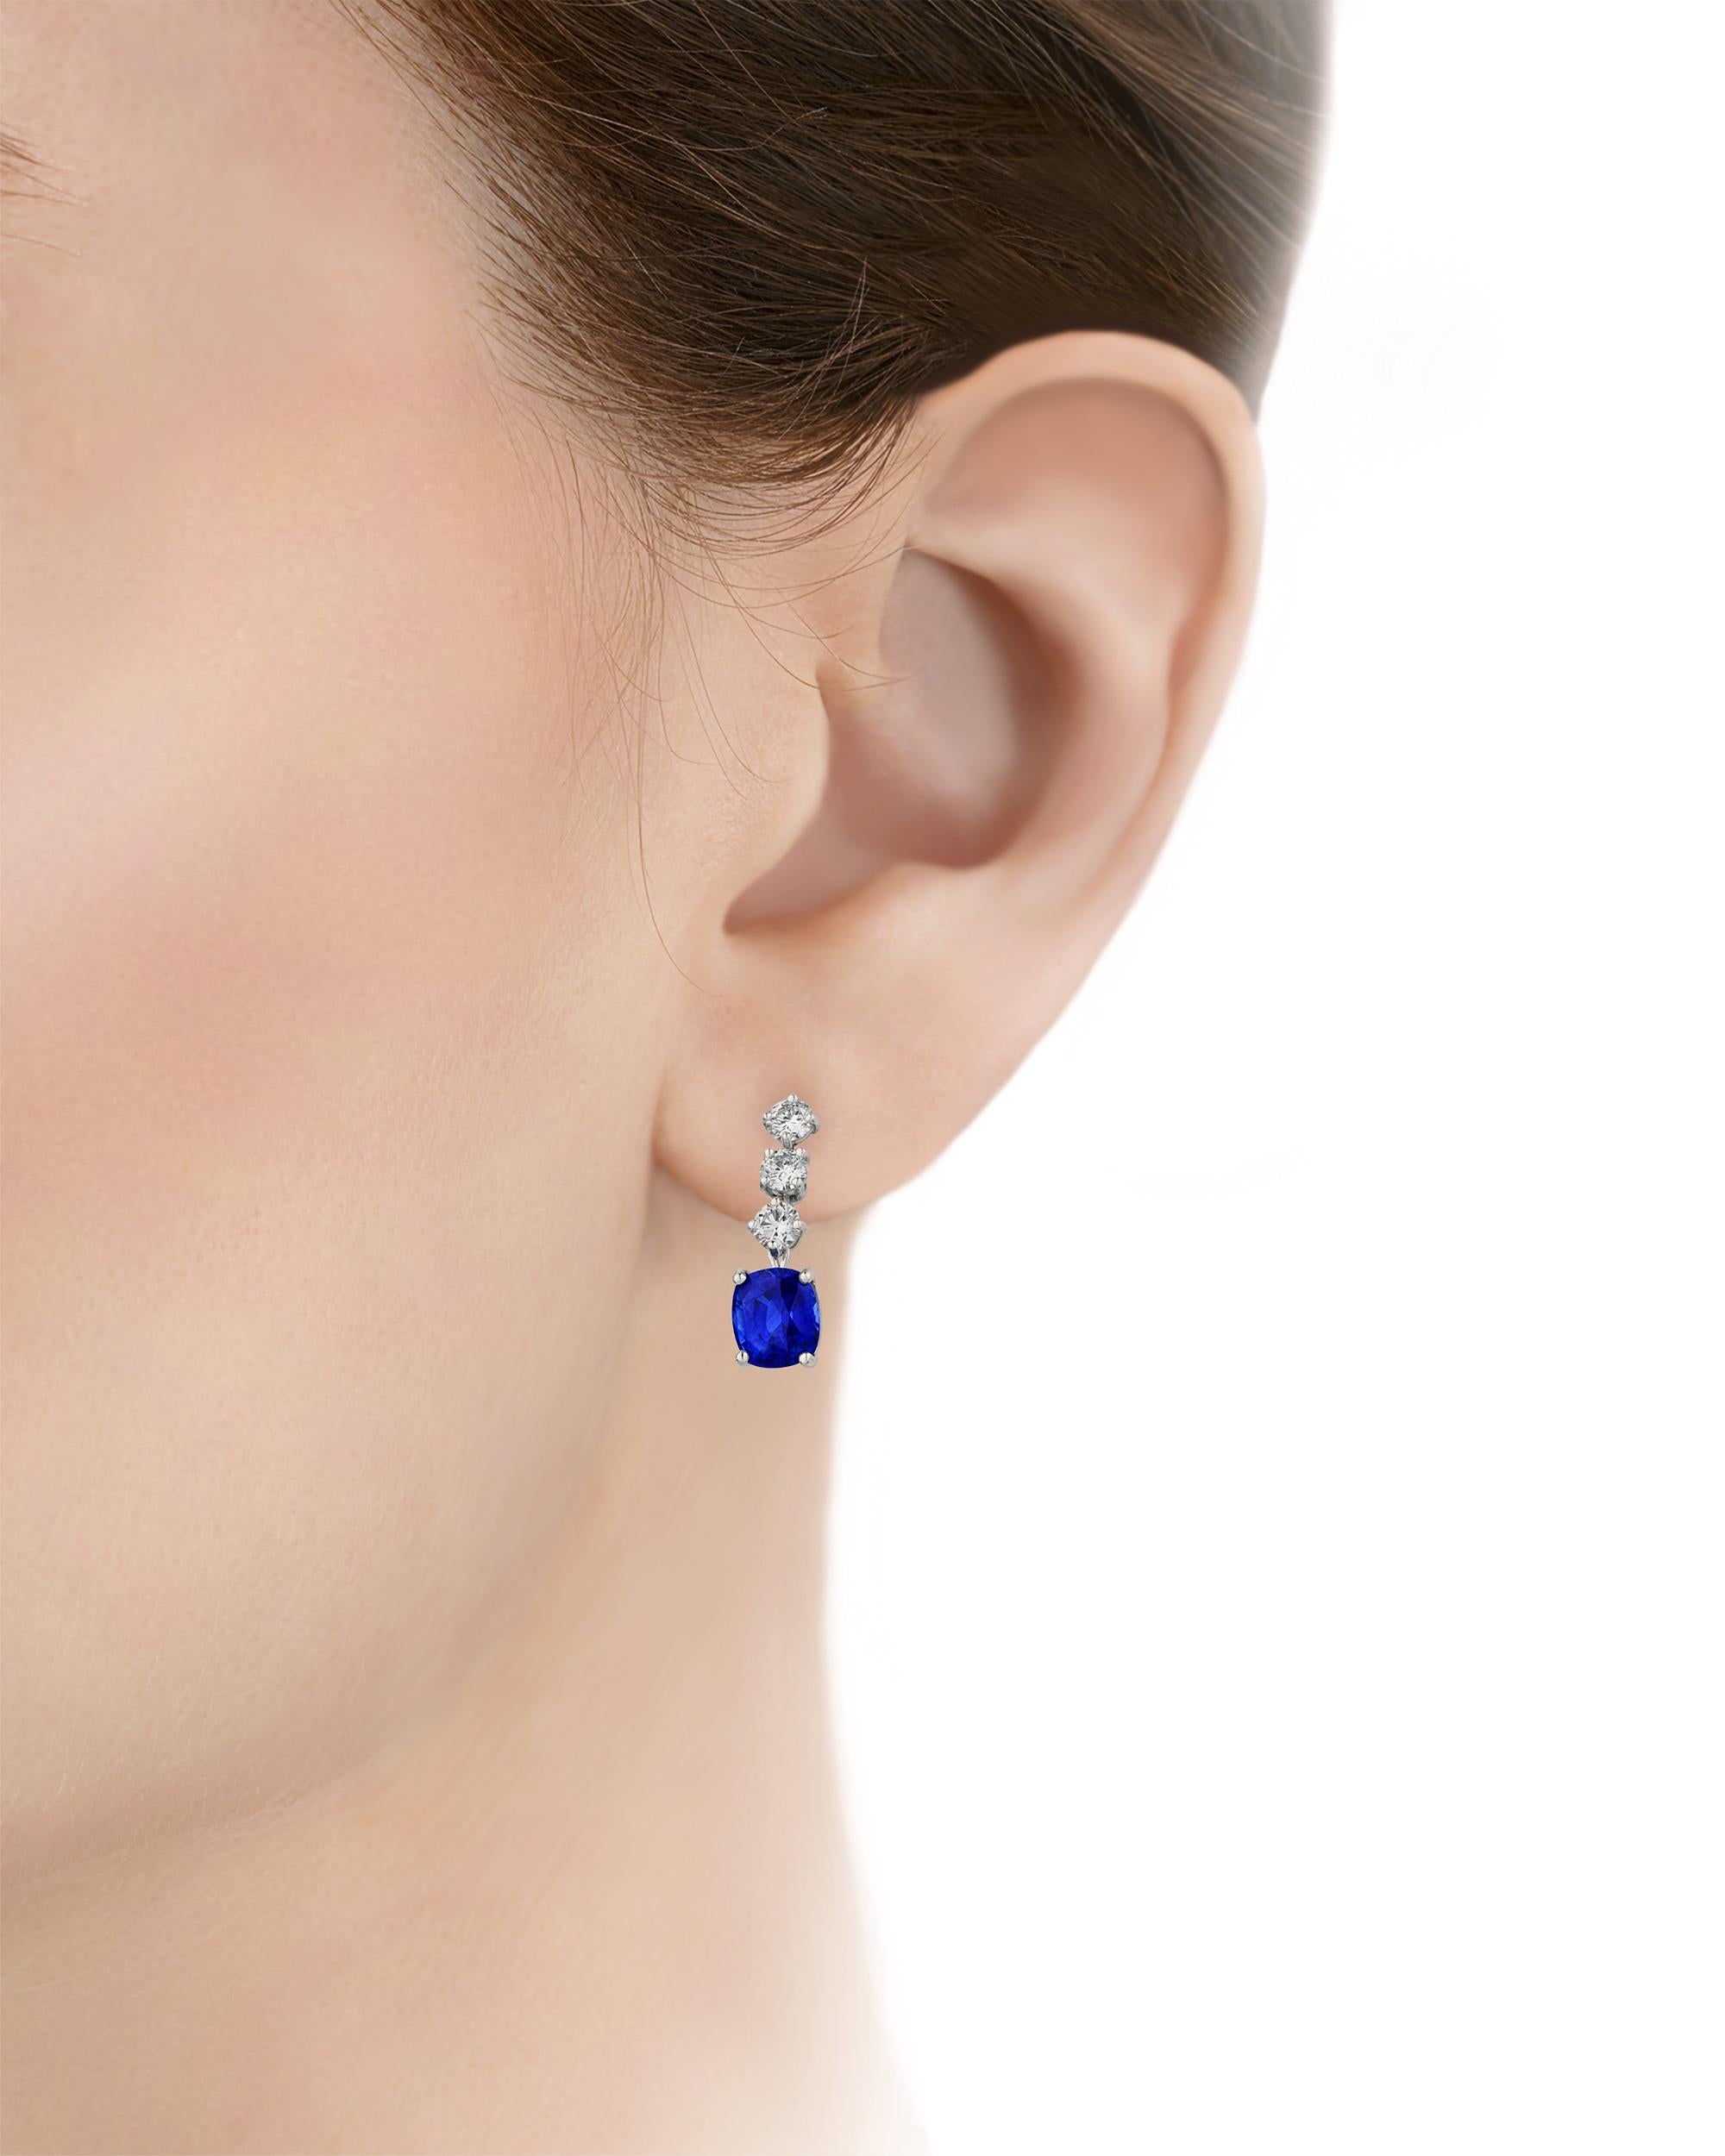 Featuring the luxurious royal blue hue for which the stones are prized, two vividly hued sapphires totaling 4.24 carats form the final pendant in these drop earrings from famed American jeweler Oscar Heyman. The precious gemstones are certified by